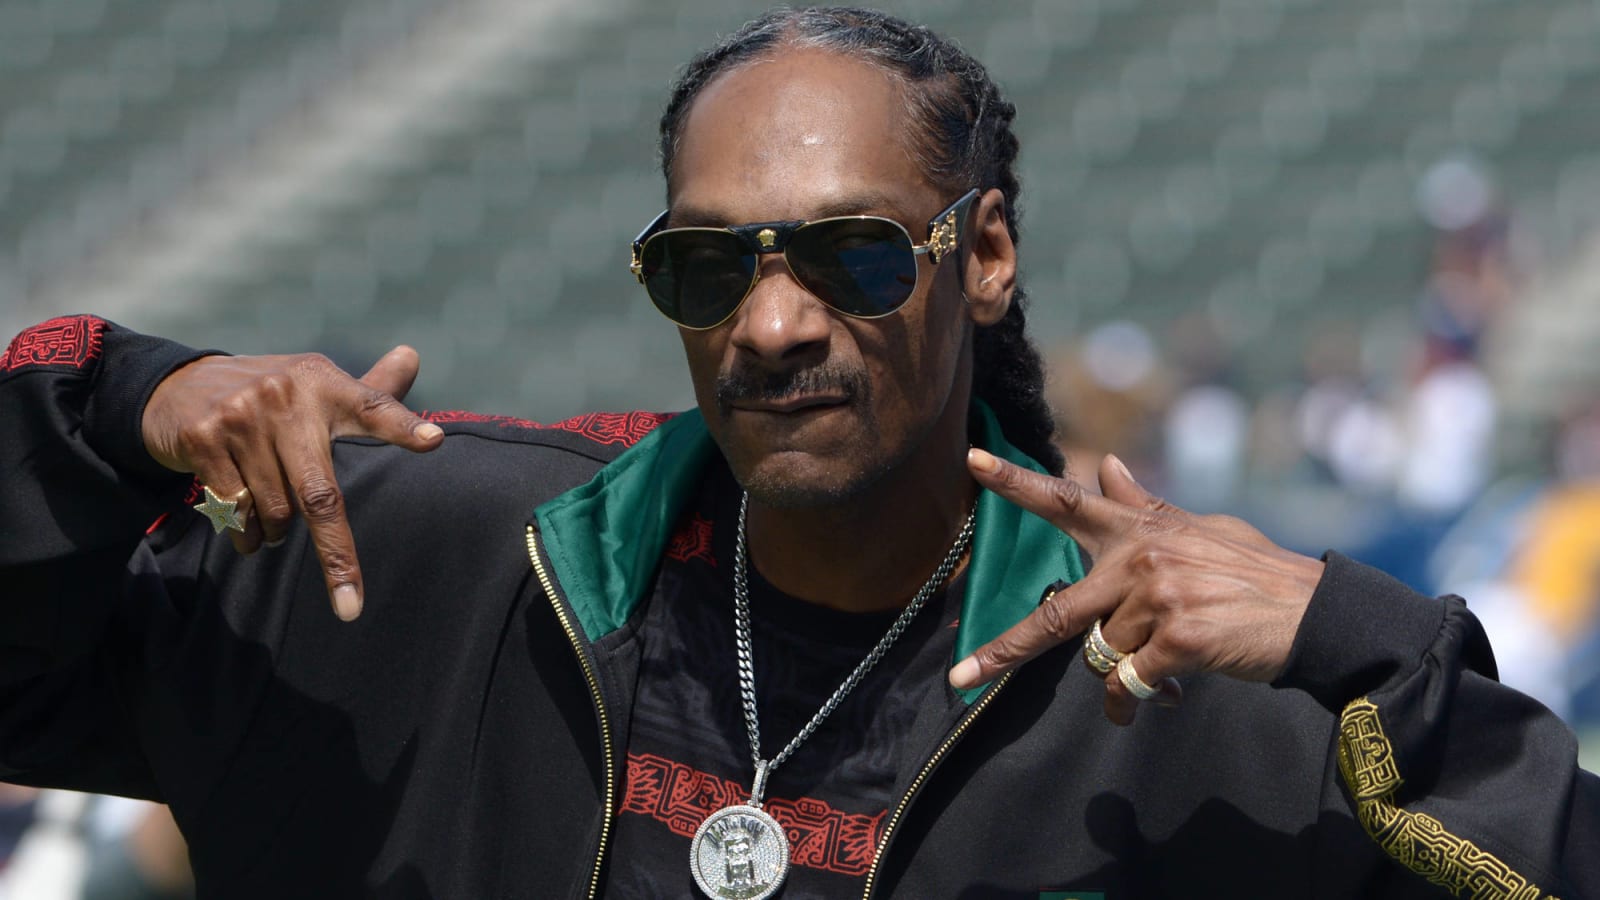 See Snoop Dogg Provide Play-by-Play for Los Angeles Kings Hockey Game